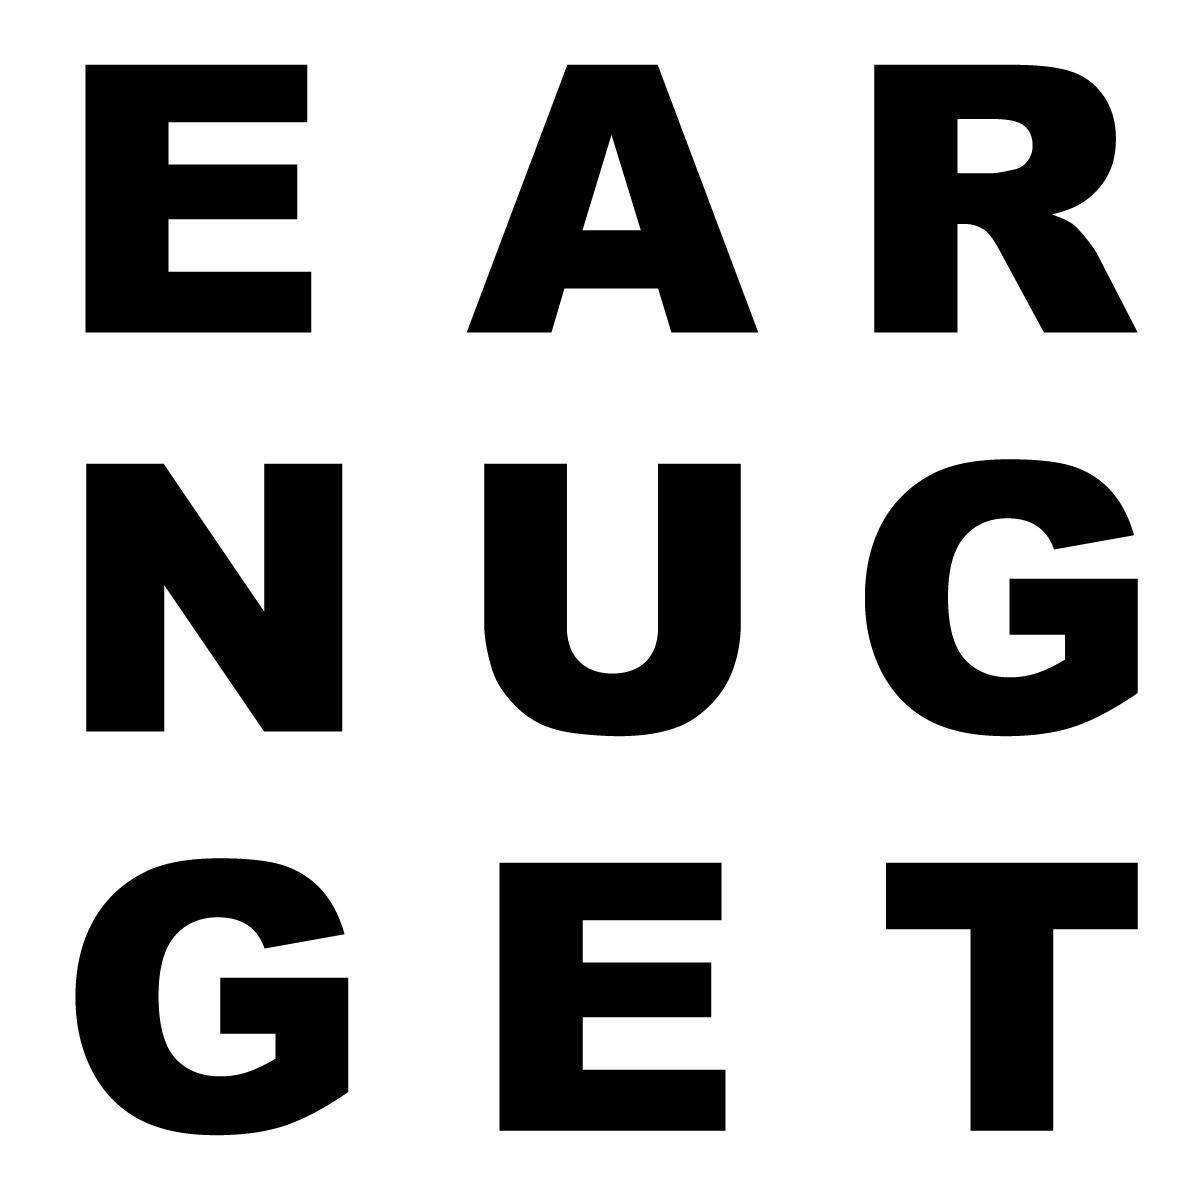 Writers, Photographers, Promoters of Good Music. | Tag #livenuggets w/ your best live music shots. | http://t.co/RjZpIGDRaf | IG: earnuggets